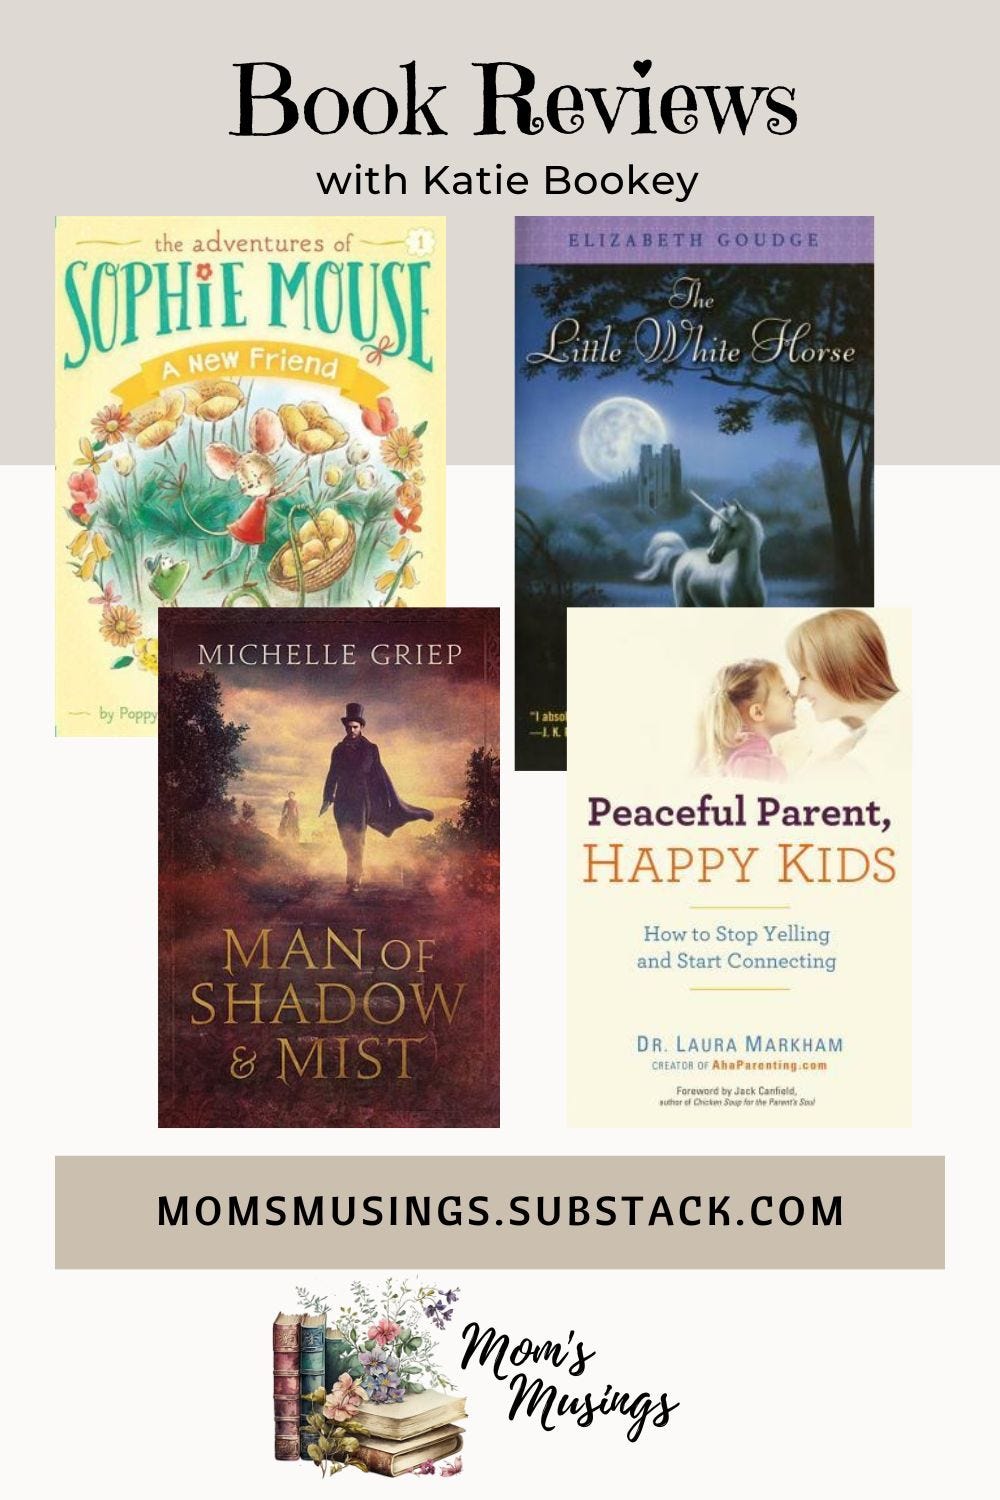 pinnable image, book reviews of sophie mouse a new friend, the little white horse, man of shadow and mist, peaceful parent happy kids